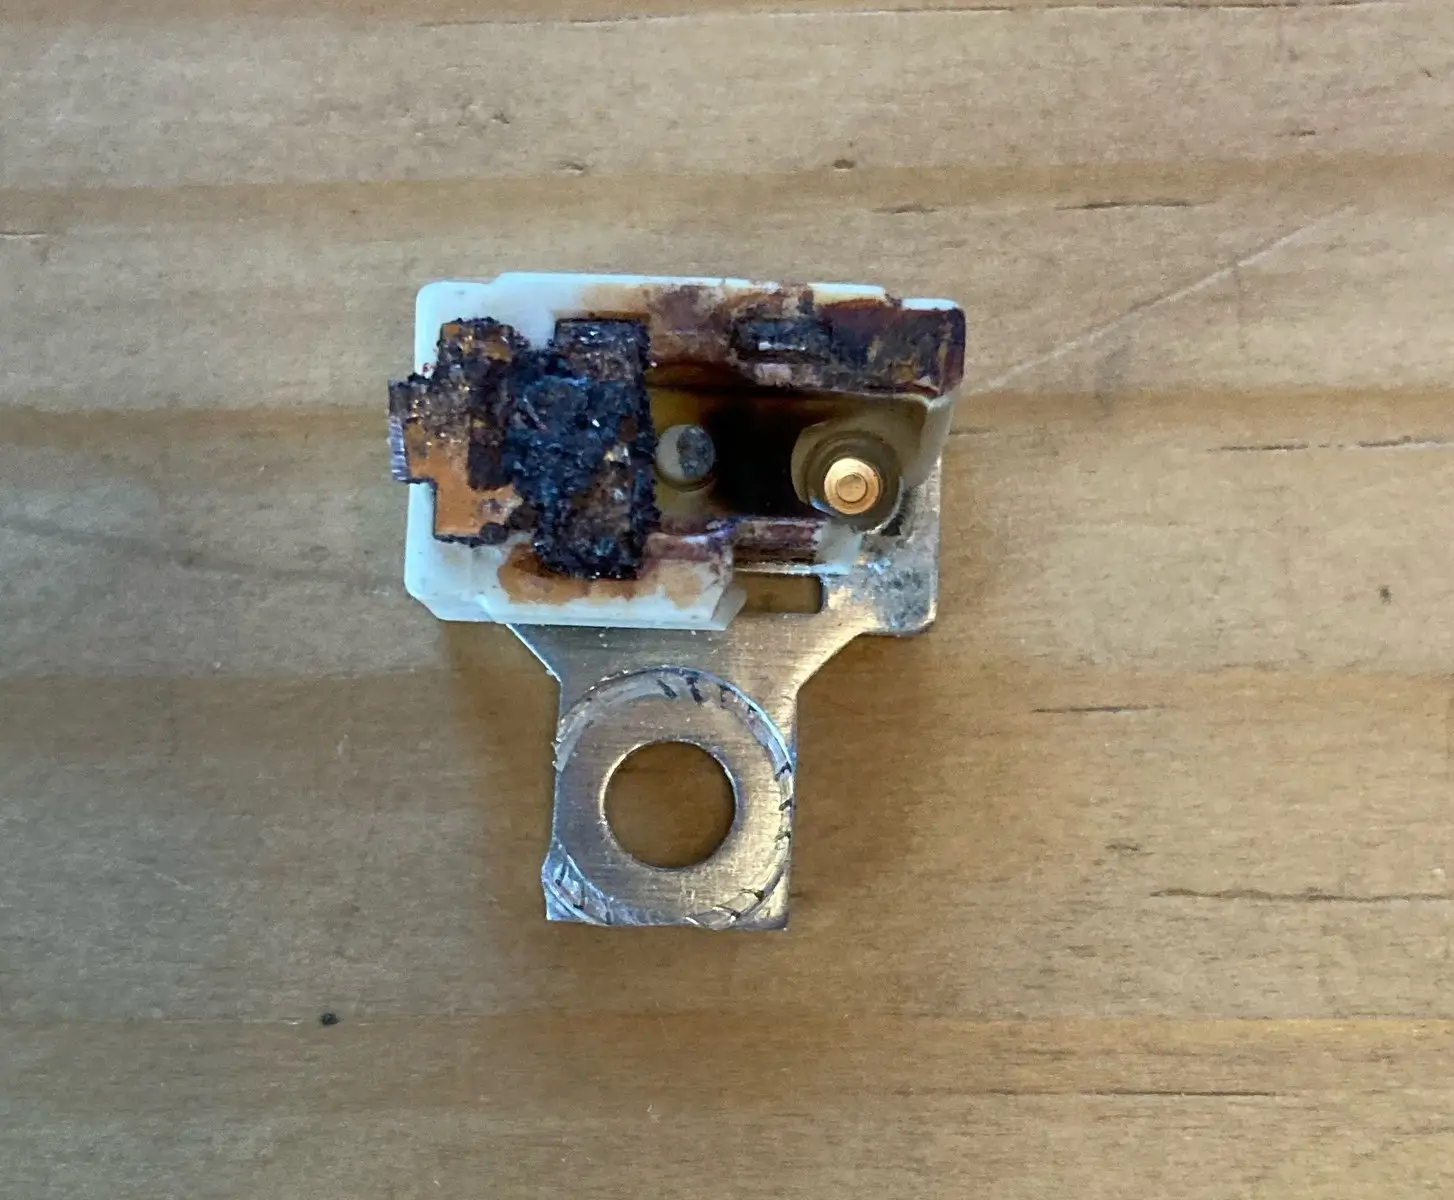 Close-up of a burned electrical switch on a wooden table. The switch is discolored and melted.